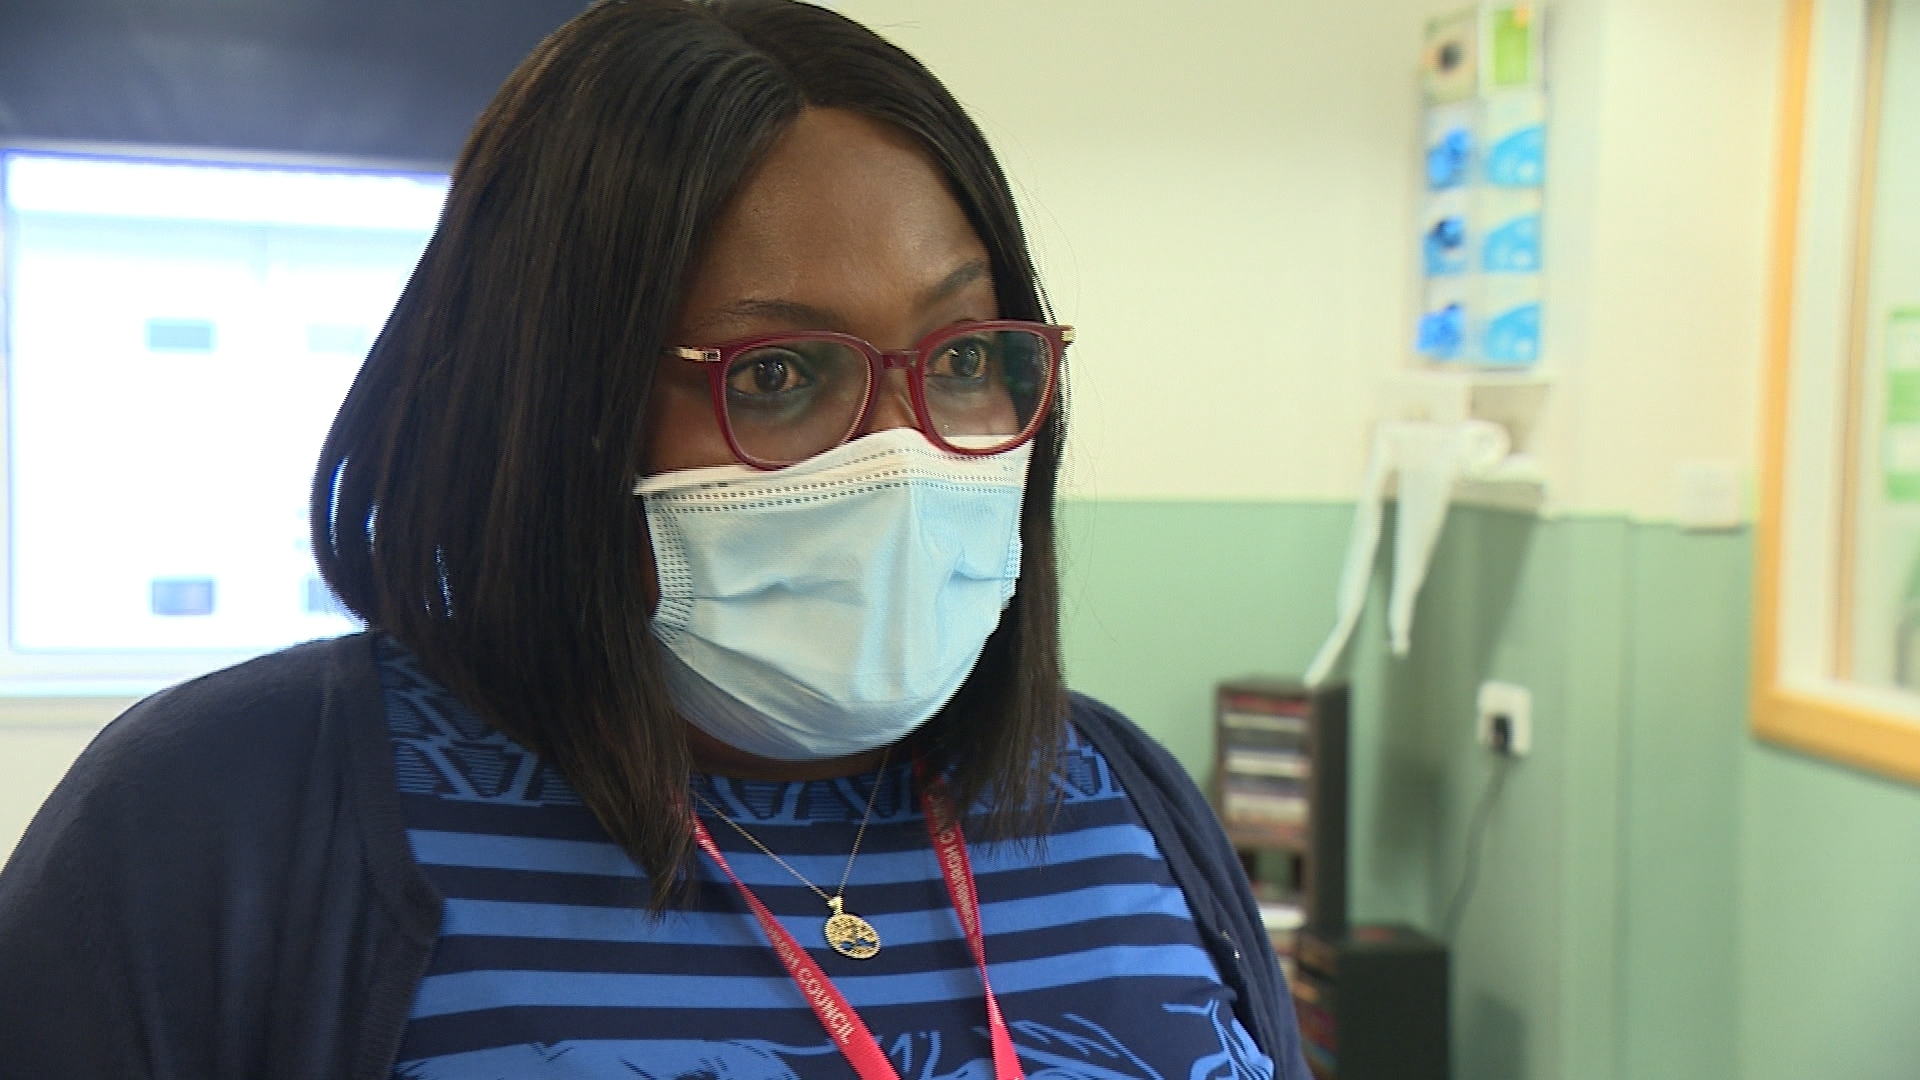 Abisayo Balogun-Odejayi is among the social workers deployed at the hospital.